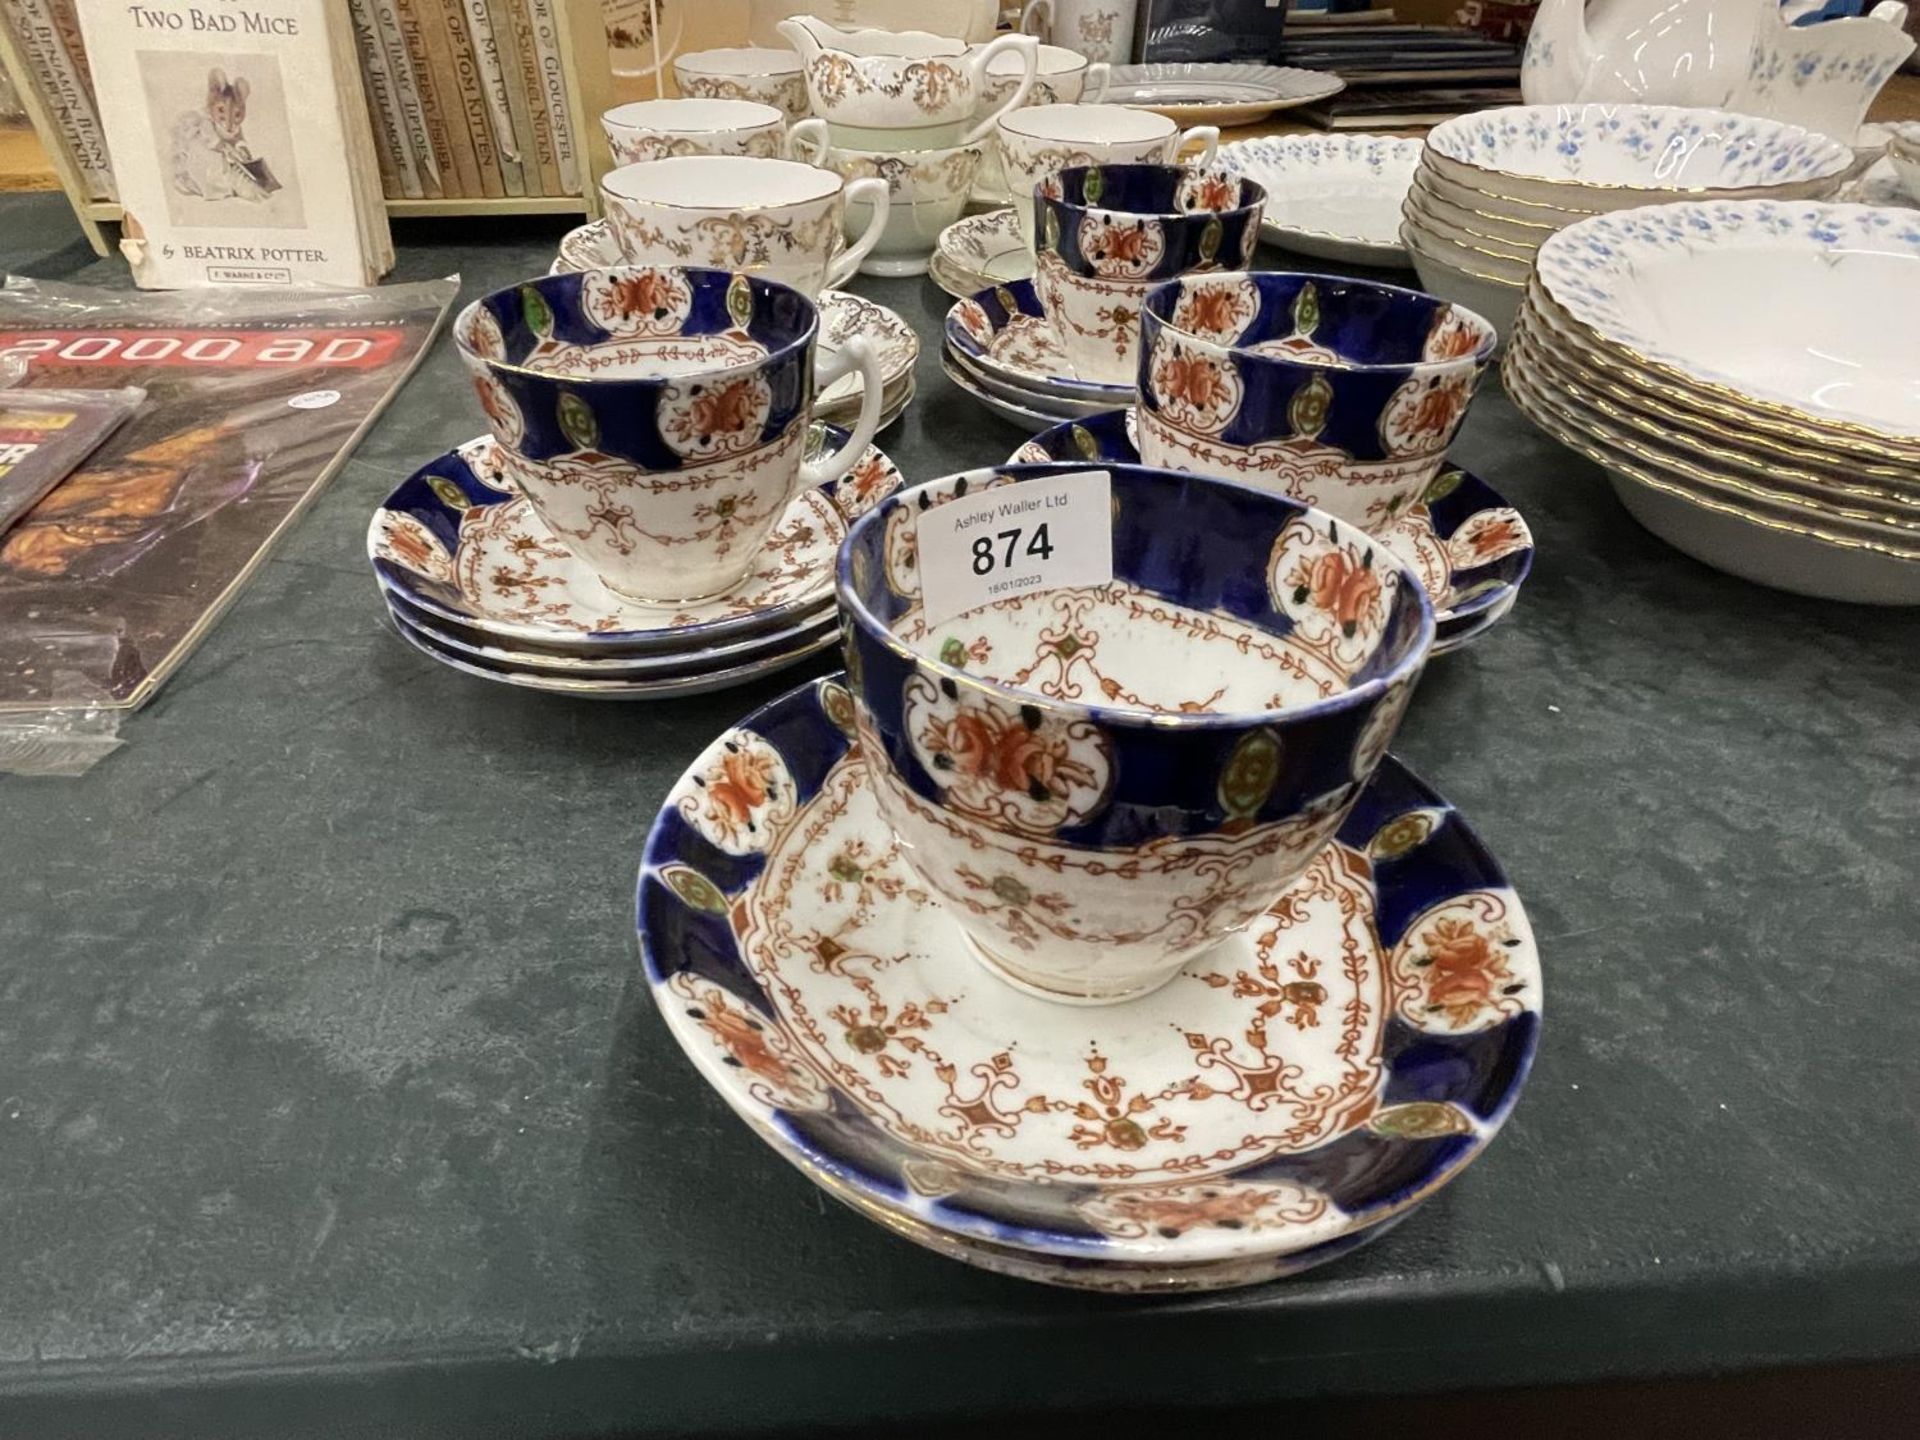 AN ANTIQUE STANLEY & CO "CITY" PART TEASET TOGETHER WITH A SUTHERLAND CHINA TEASET - Image 2 of 4